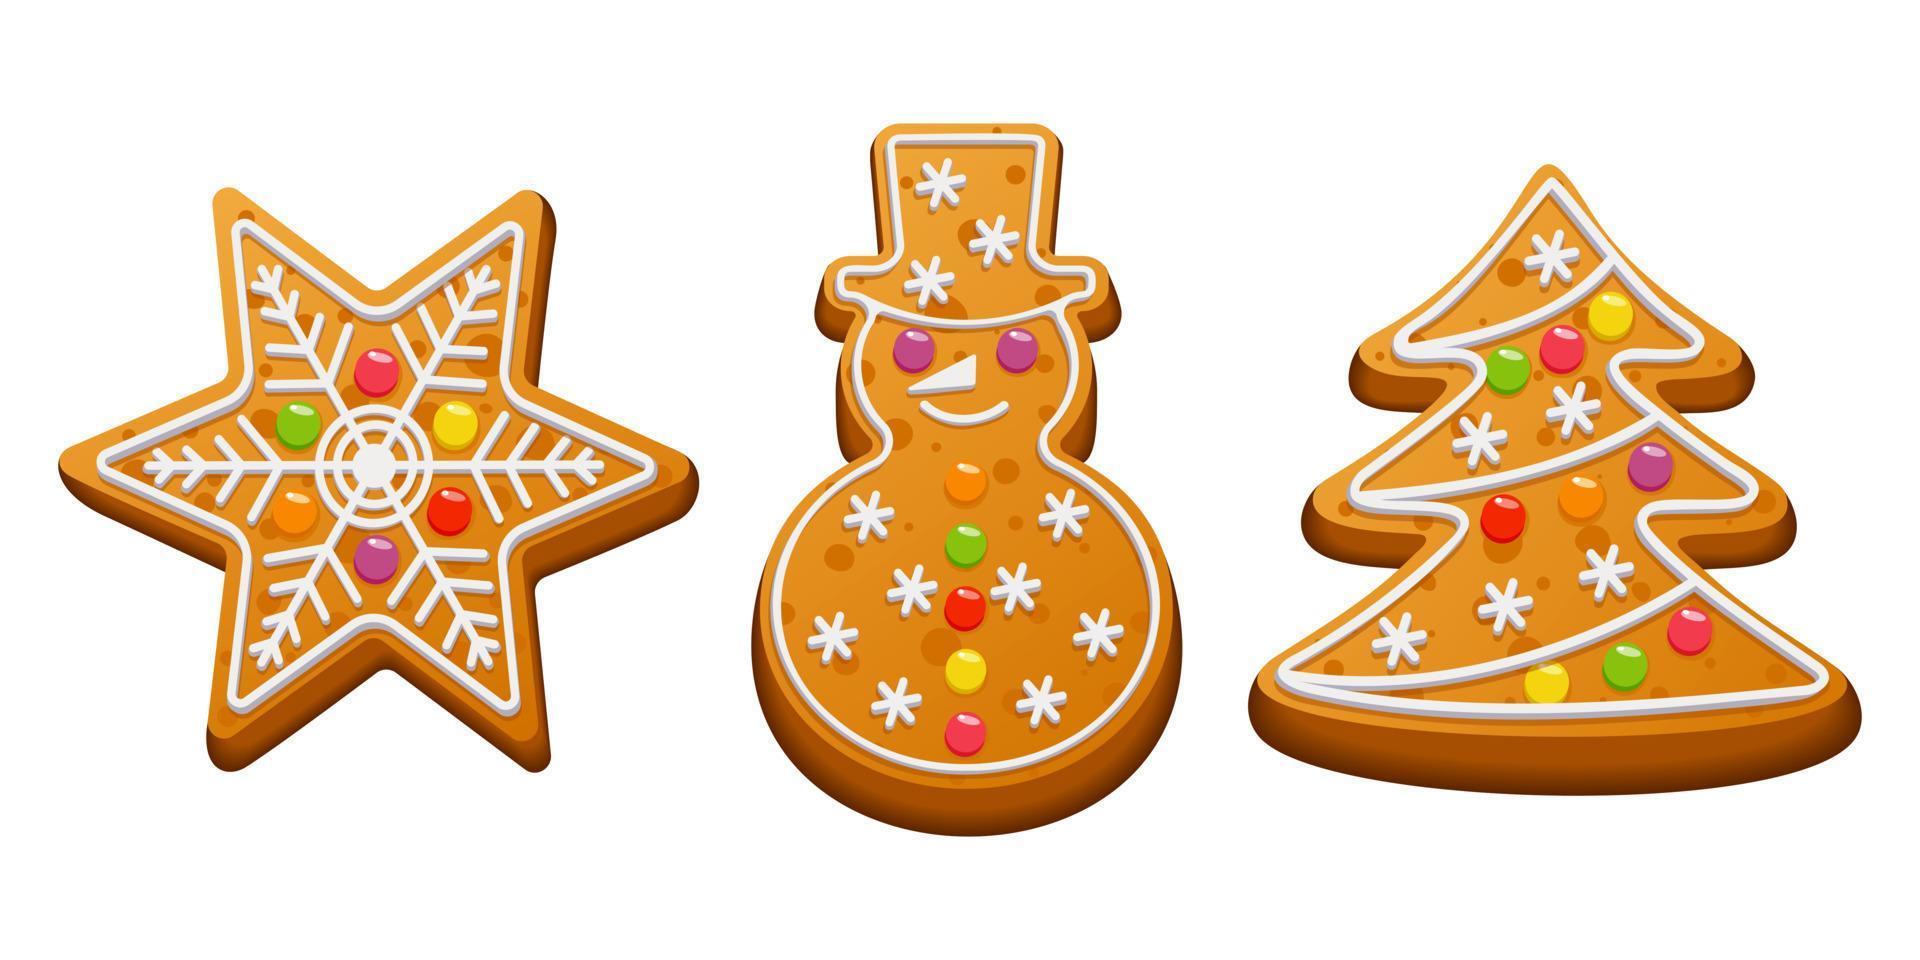 Festive winter cookies snowman, christmas tree, star with sugar icing and marmalade. Gingerbread for Christmas. Vector illustration.